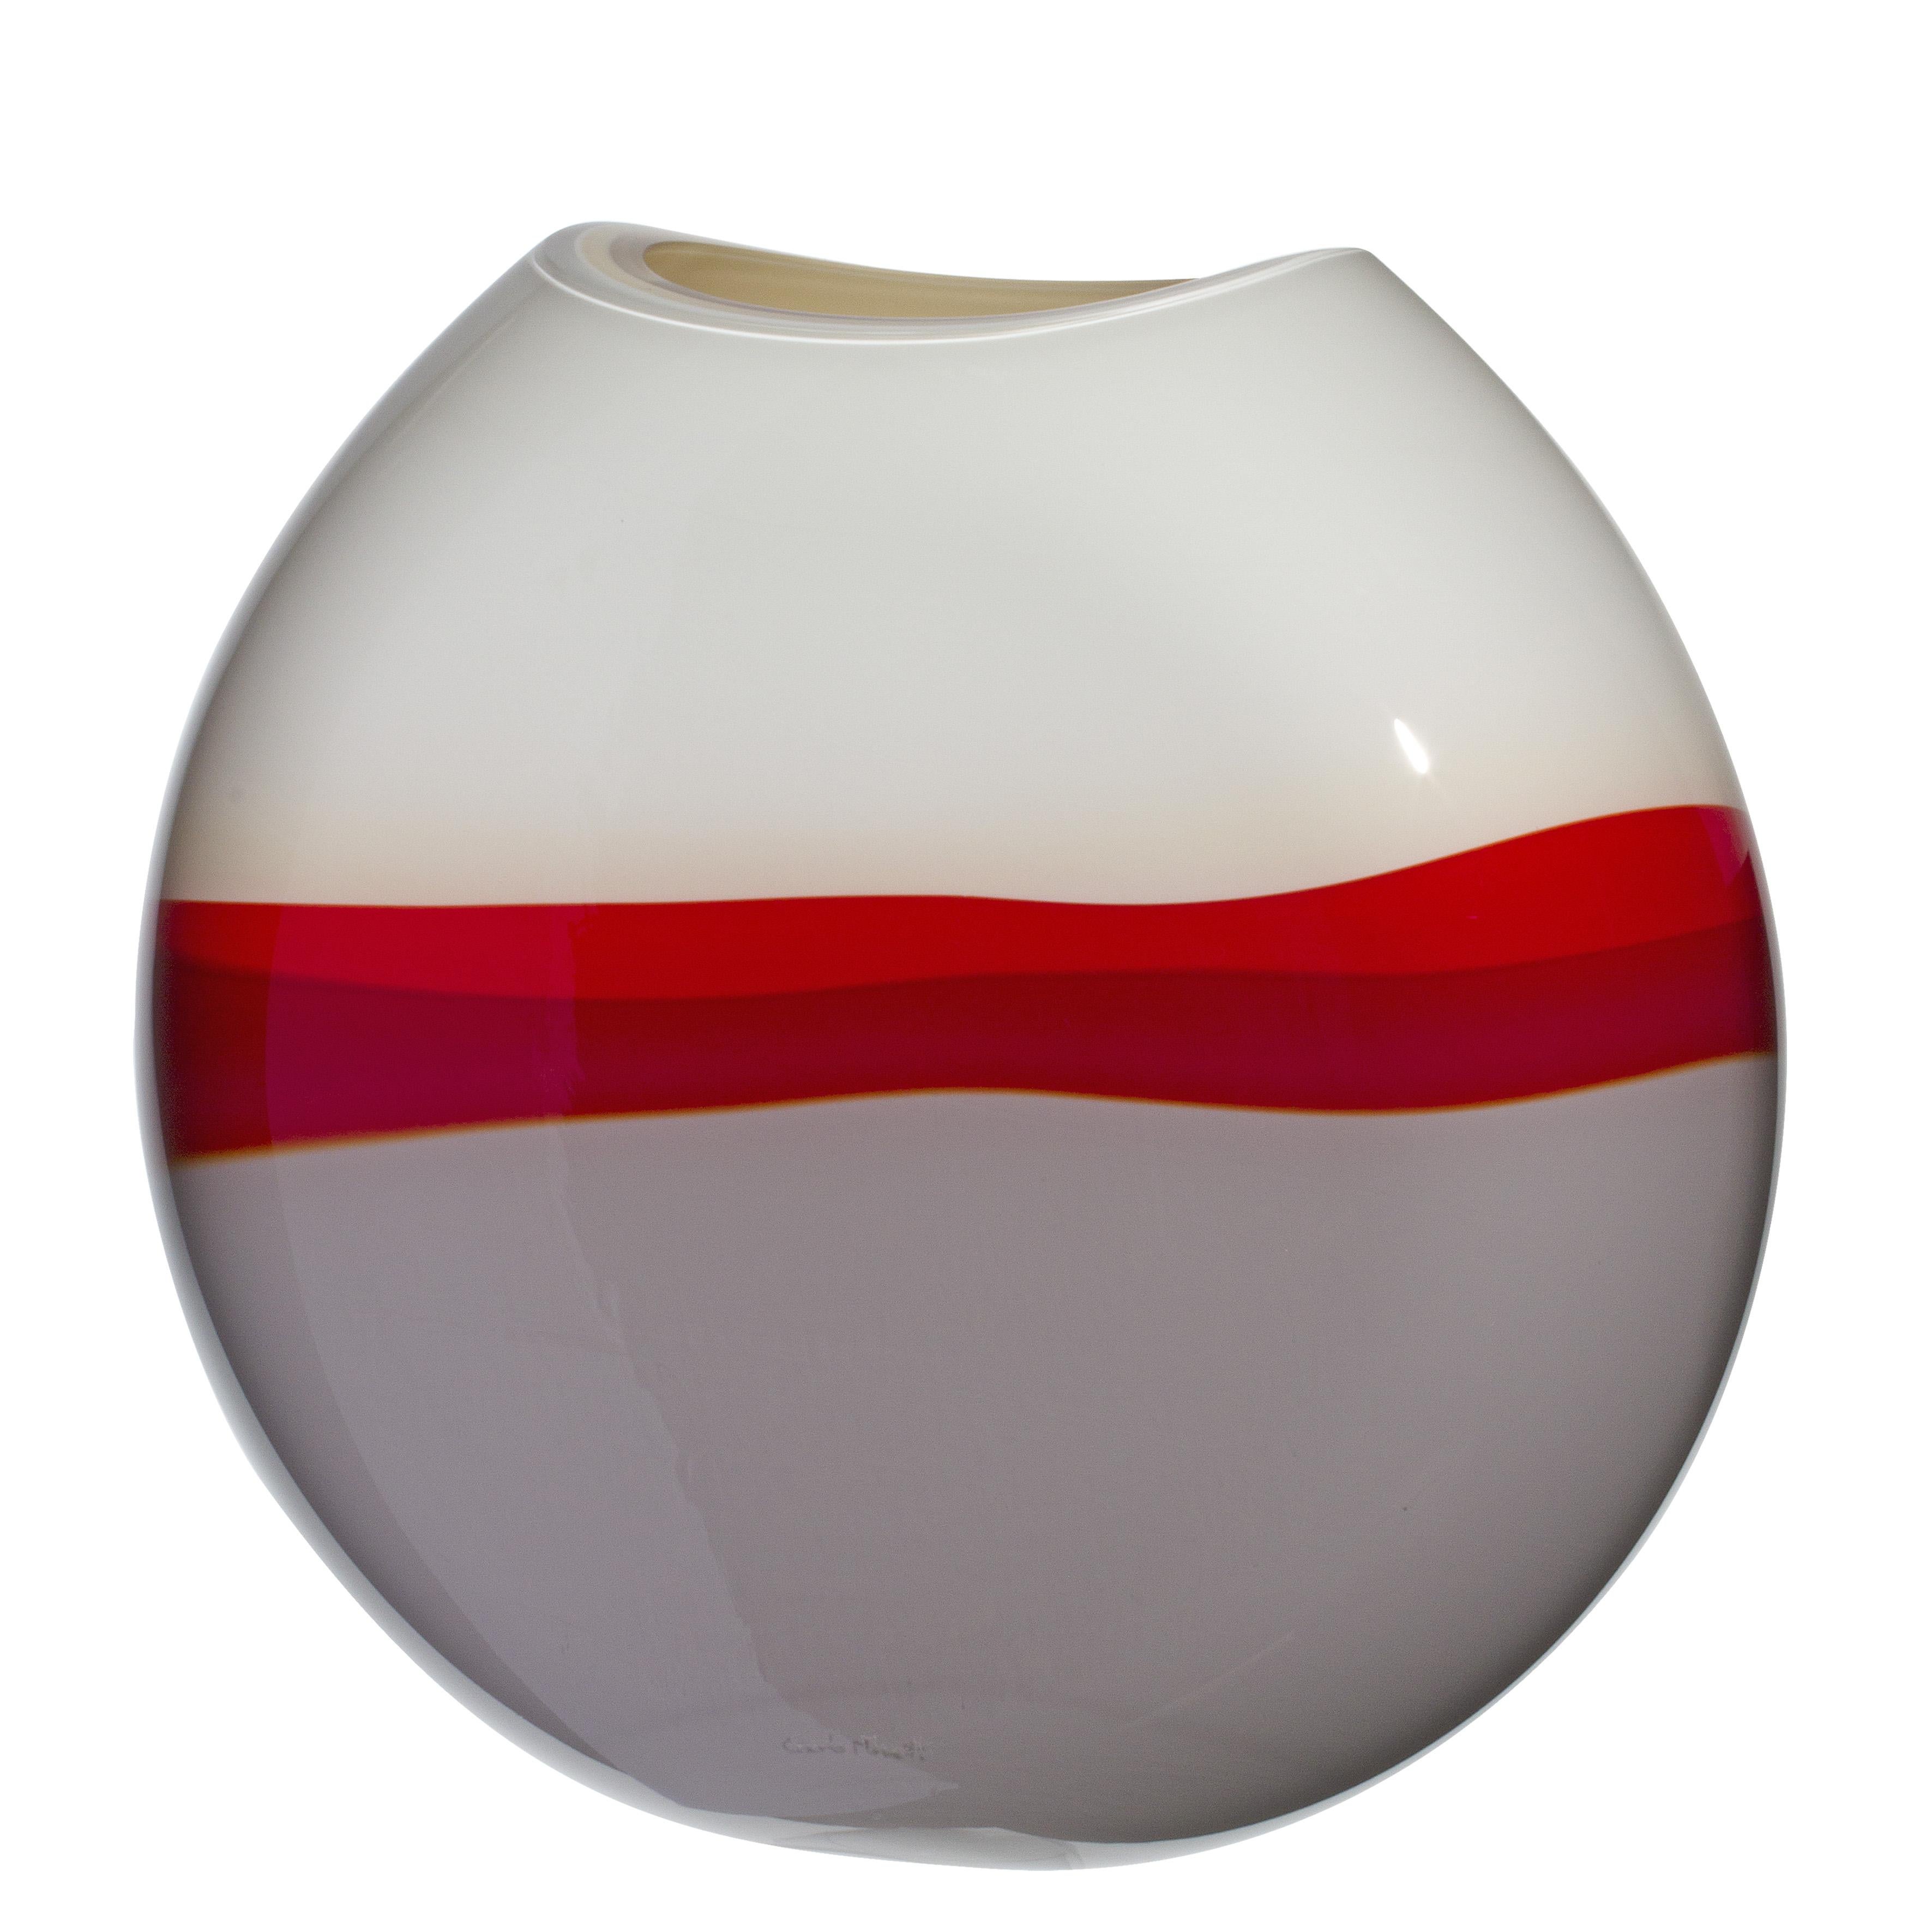 Large Eclissi Vase in Red, Ivory, and Grey by Carlo Moretti